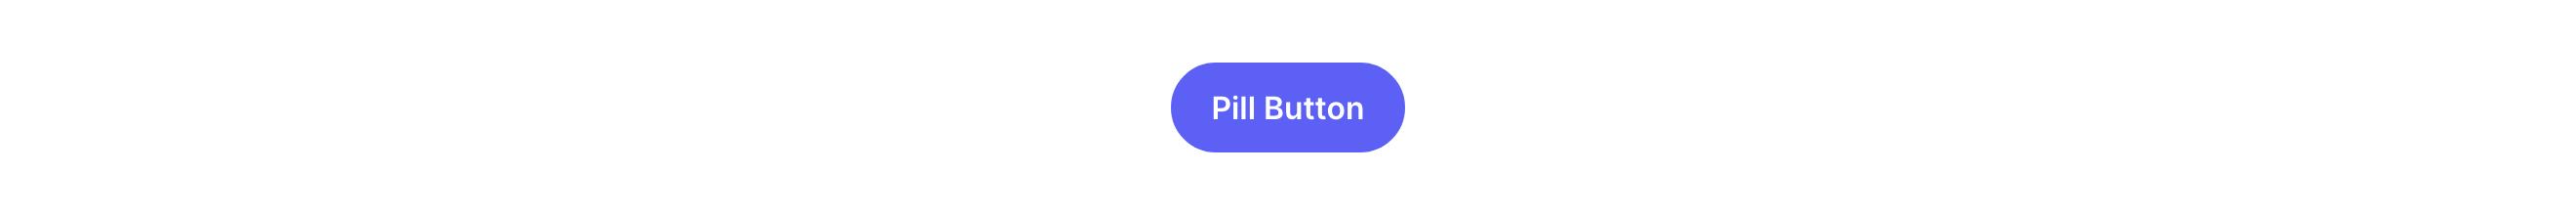 With pill shape